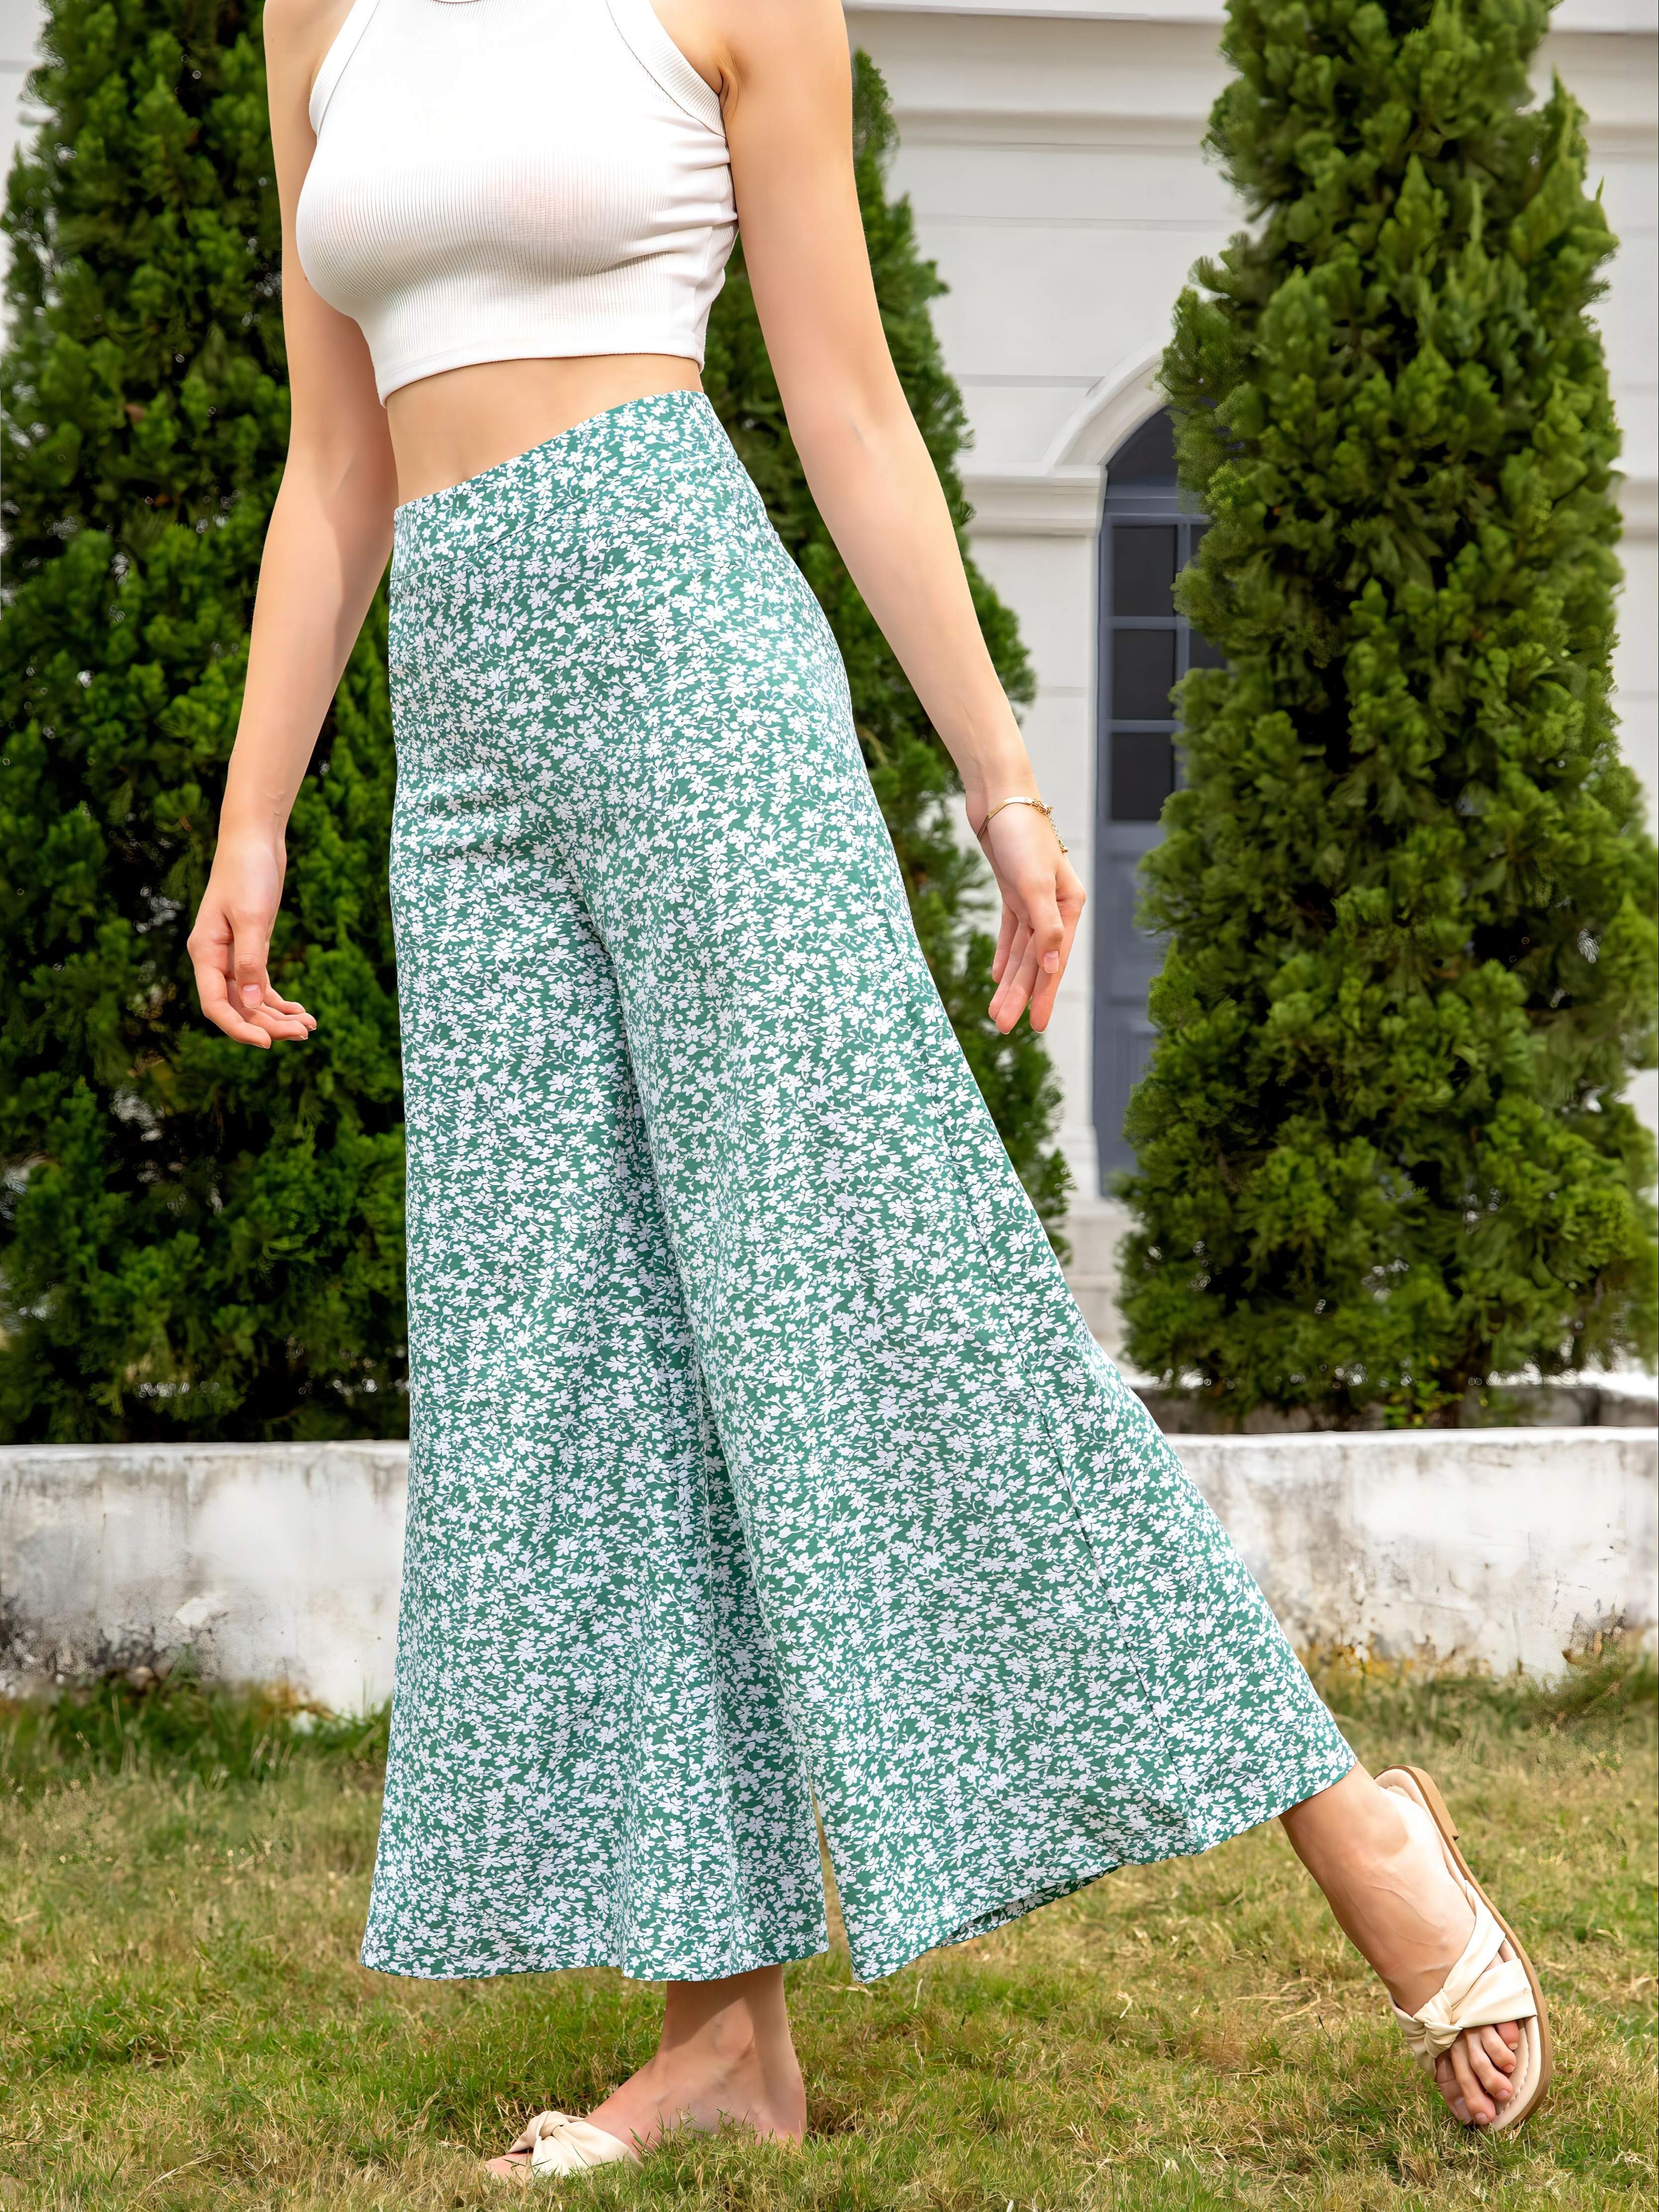 YWDJ Palazzo Pants for Women Petite Formal Relaxed Fit Baggy Wide